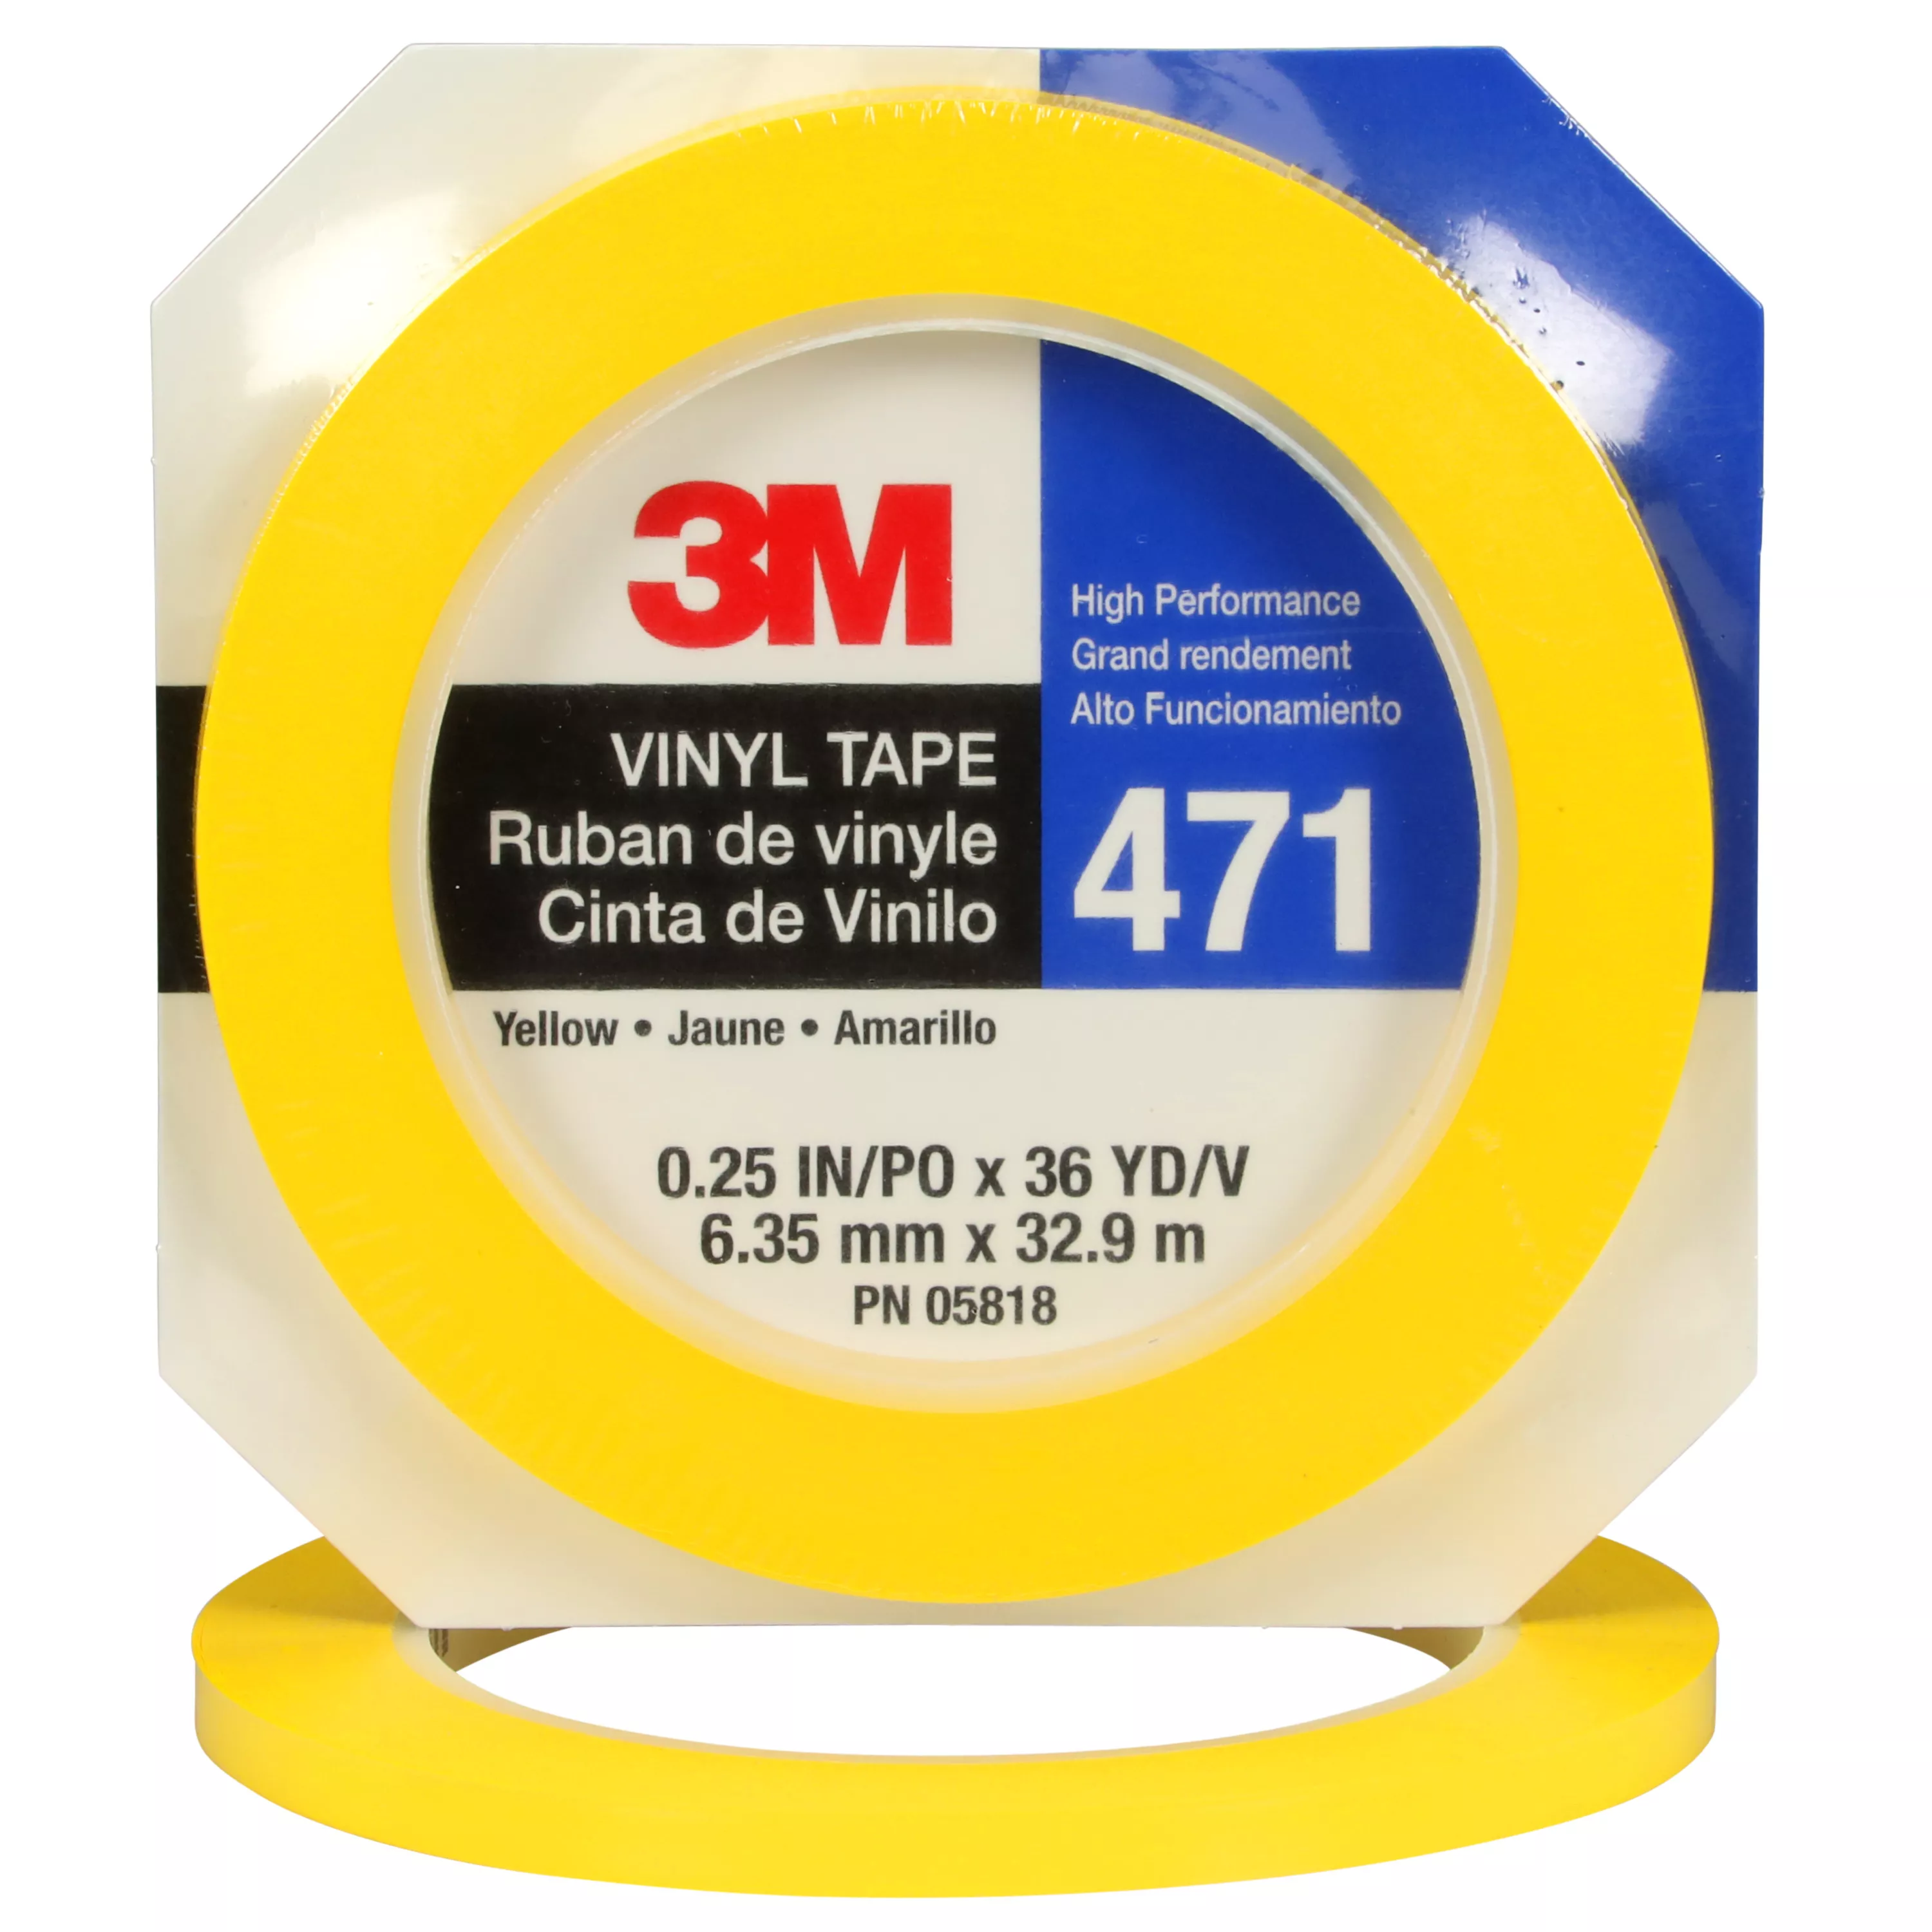 3M™ Vinyl Tape 471, Yellow, 1/4 in x 36 yd, 5.2 mil, 144 Roll/Case, Heat
Treated, Individually Wrapped Conveniently Packaged